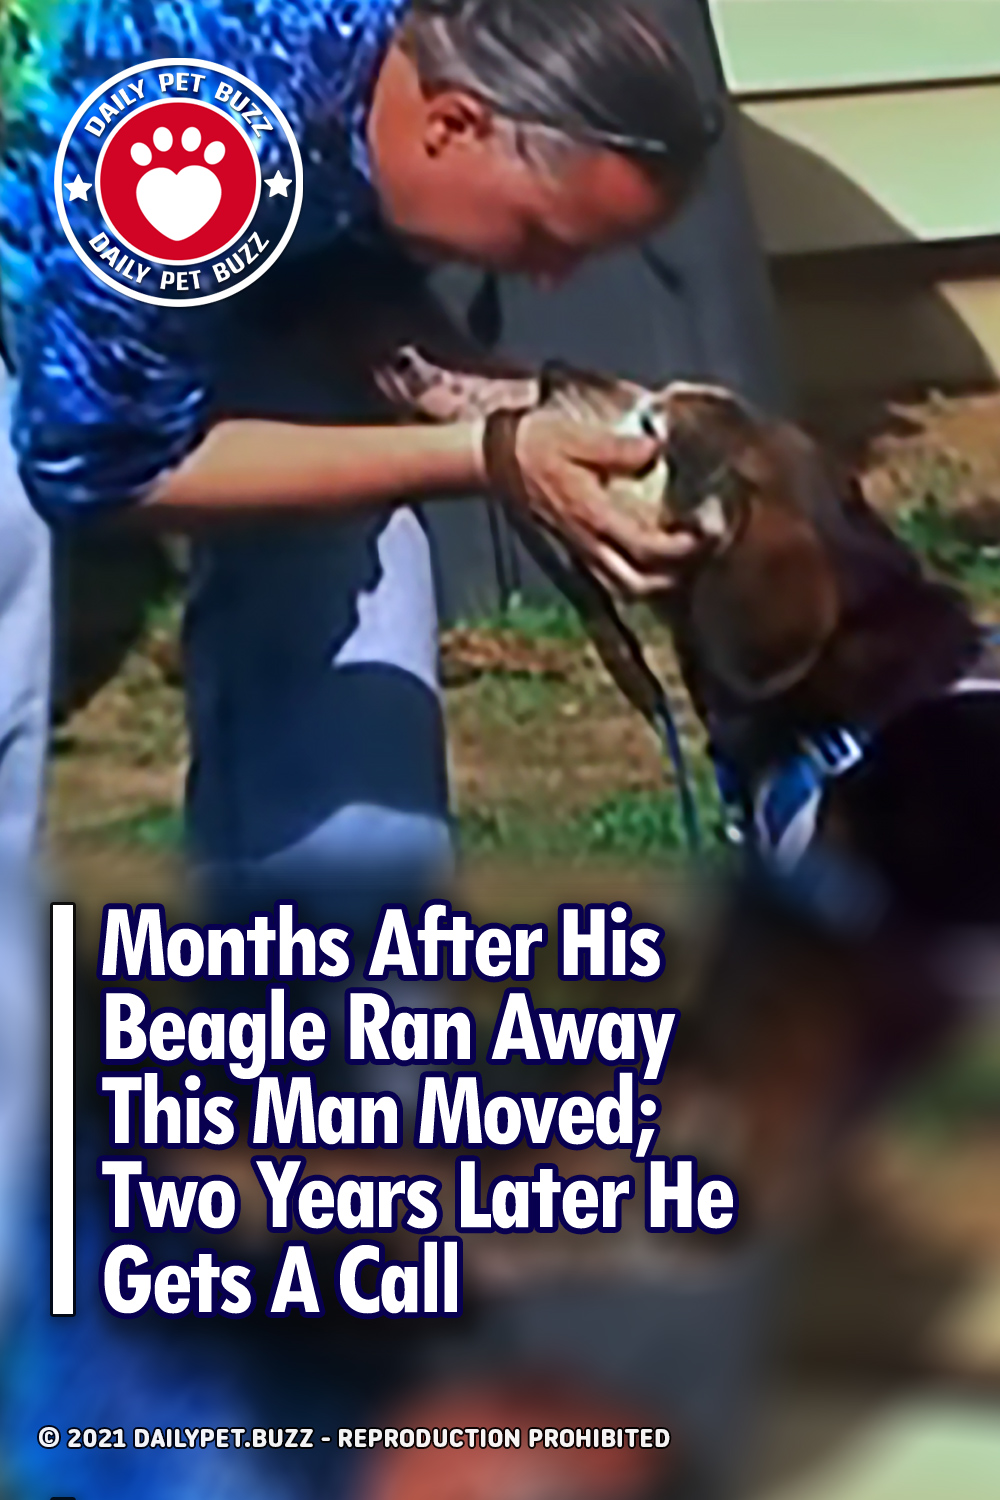 Months After His Beagle Ran Away This Man Moved; Two Years Later He Gets A Call